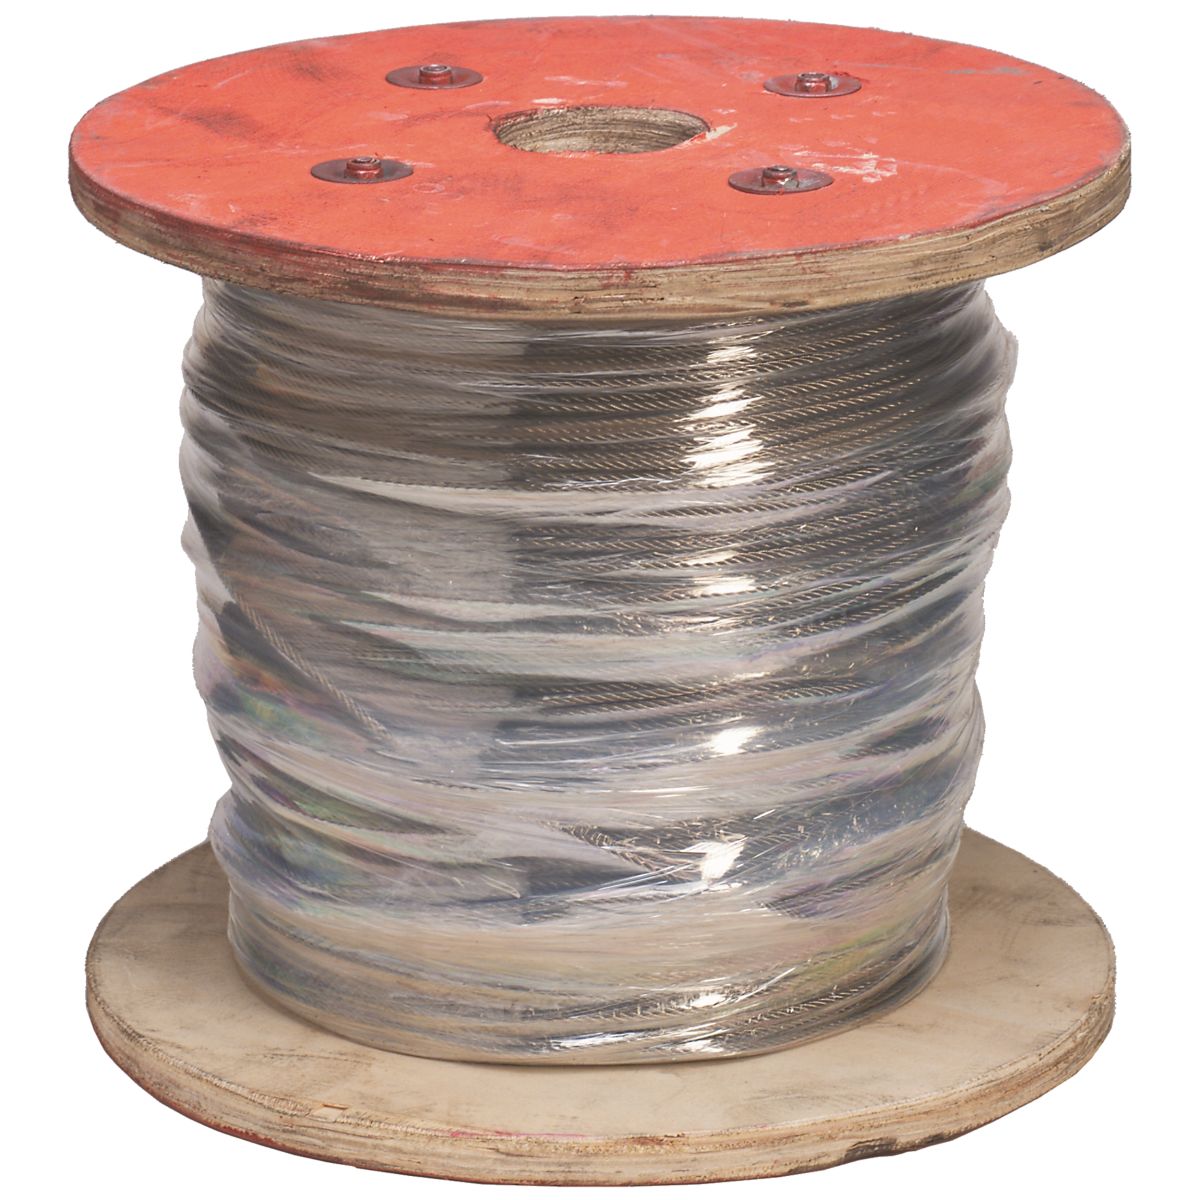 3/16" Type 304 Stainless Steel Wire Rope